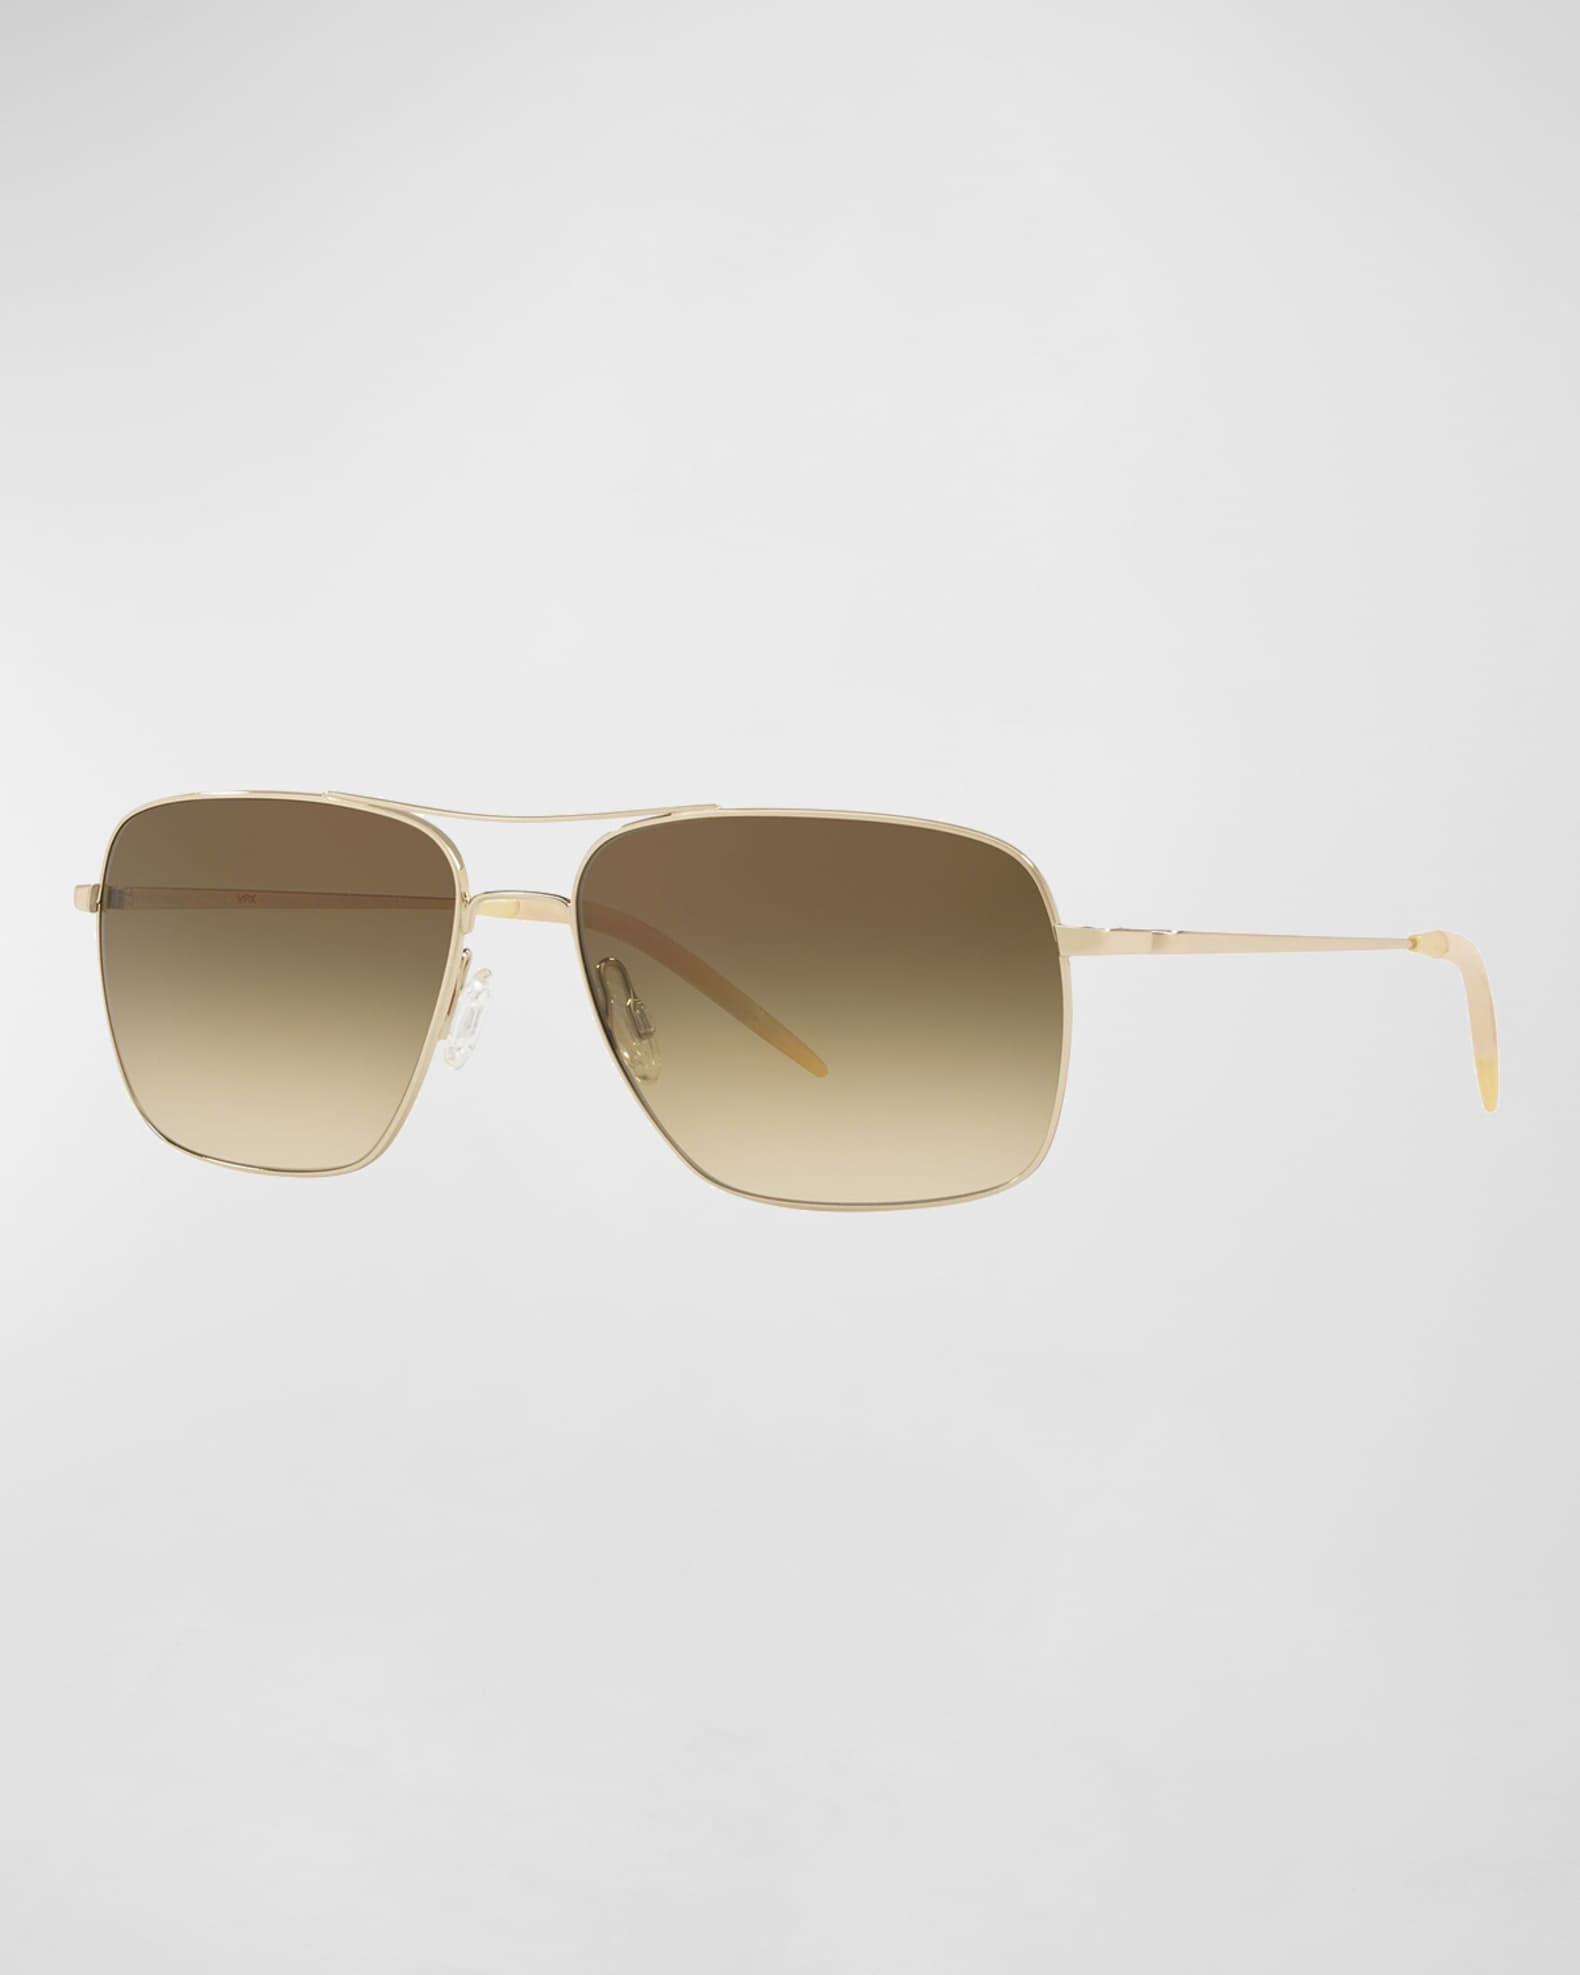 Oliver Peoples Clifton Photochromic Sunglasses, Gold | Neiman Marcus